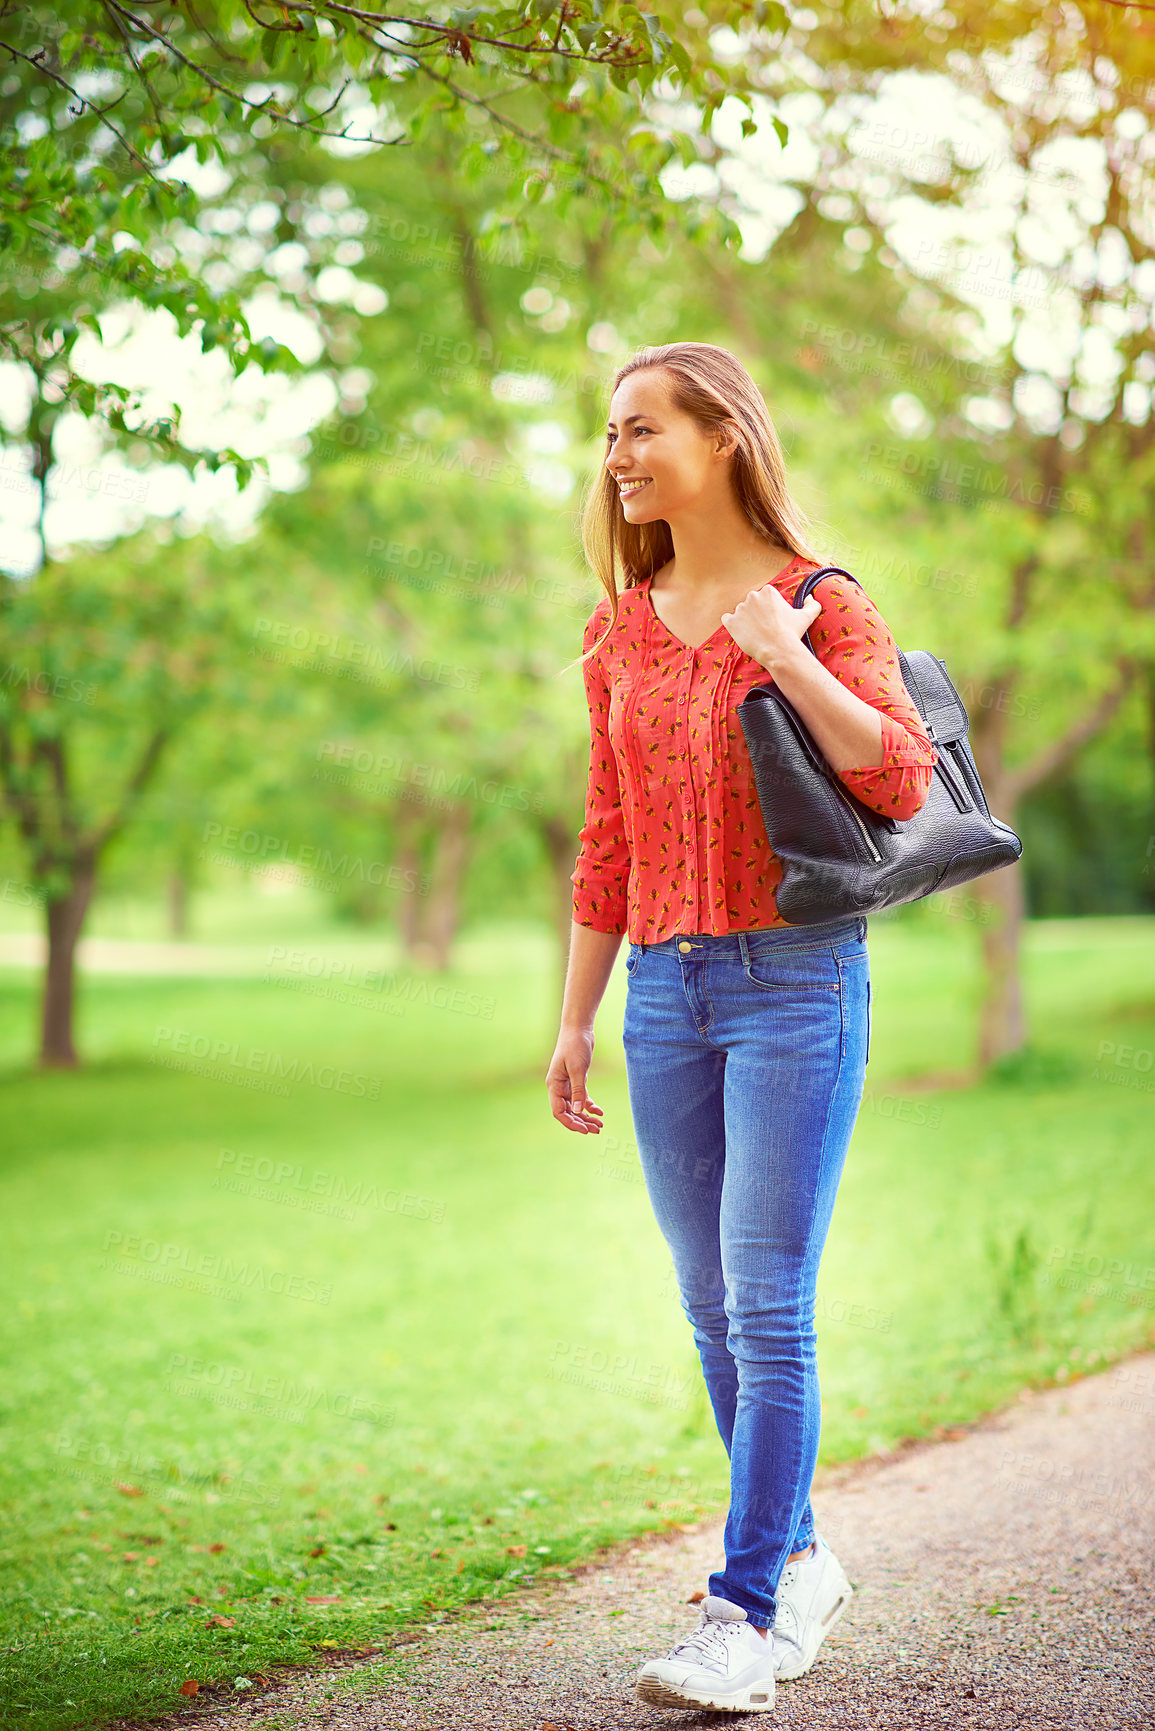 Buy stock photo Shot of a young woman on a walk through the park